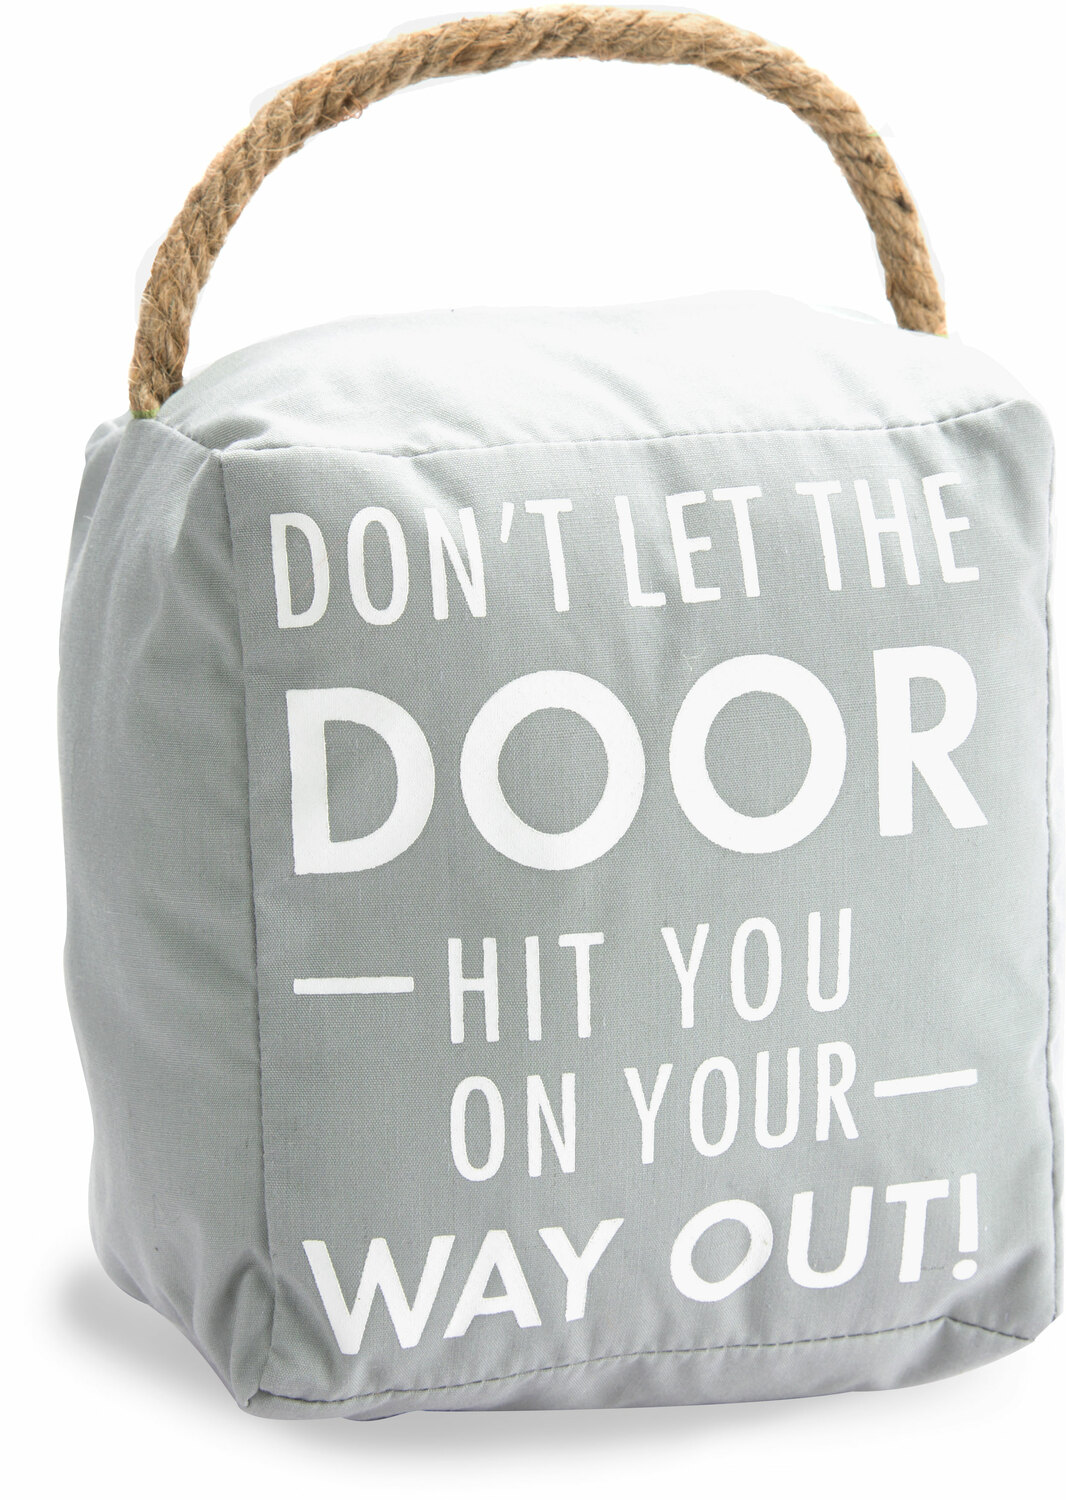 Way Out by Open Door Decor - Way Out - 5" x 6" Door Stopper